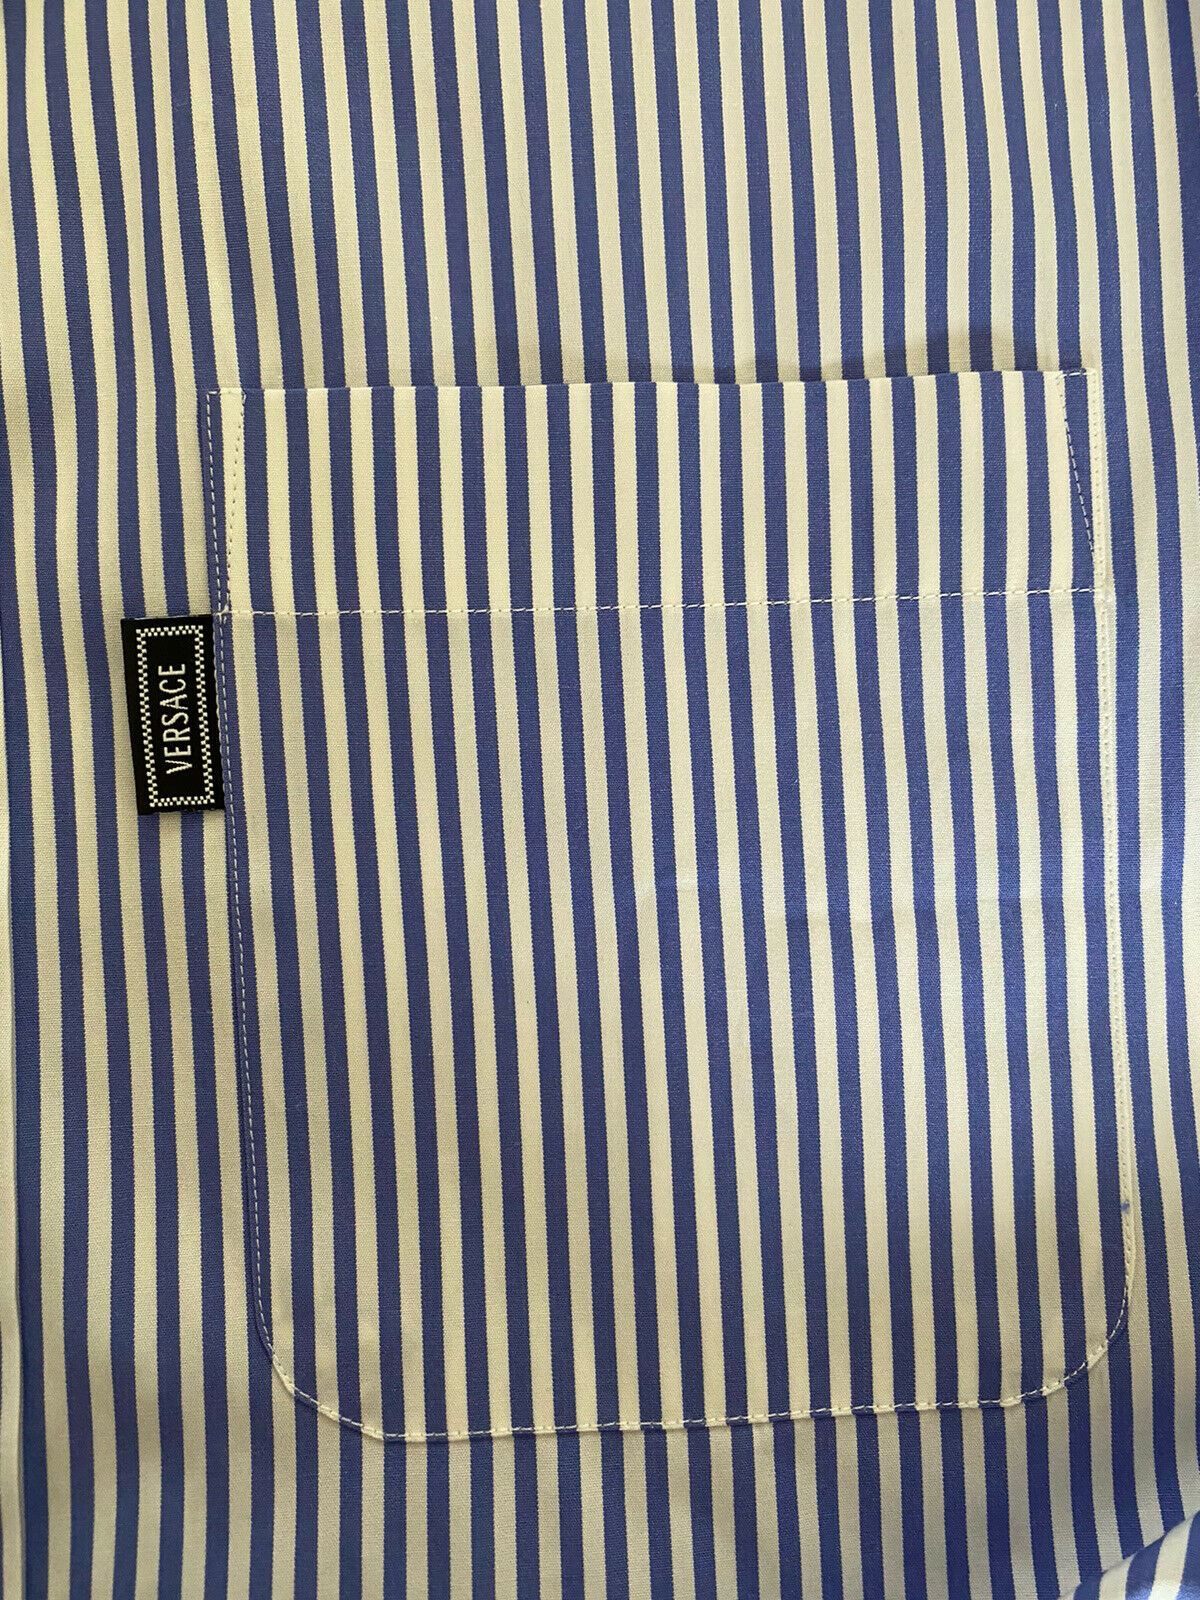 NWT $795 Versace Blue Stripe and Graphic Print Dress Shirt Size 41 A83115 Italy